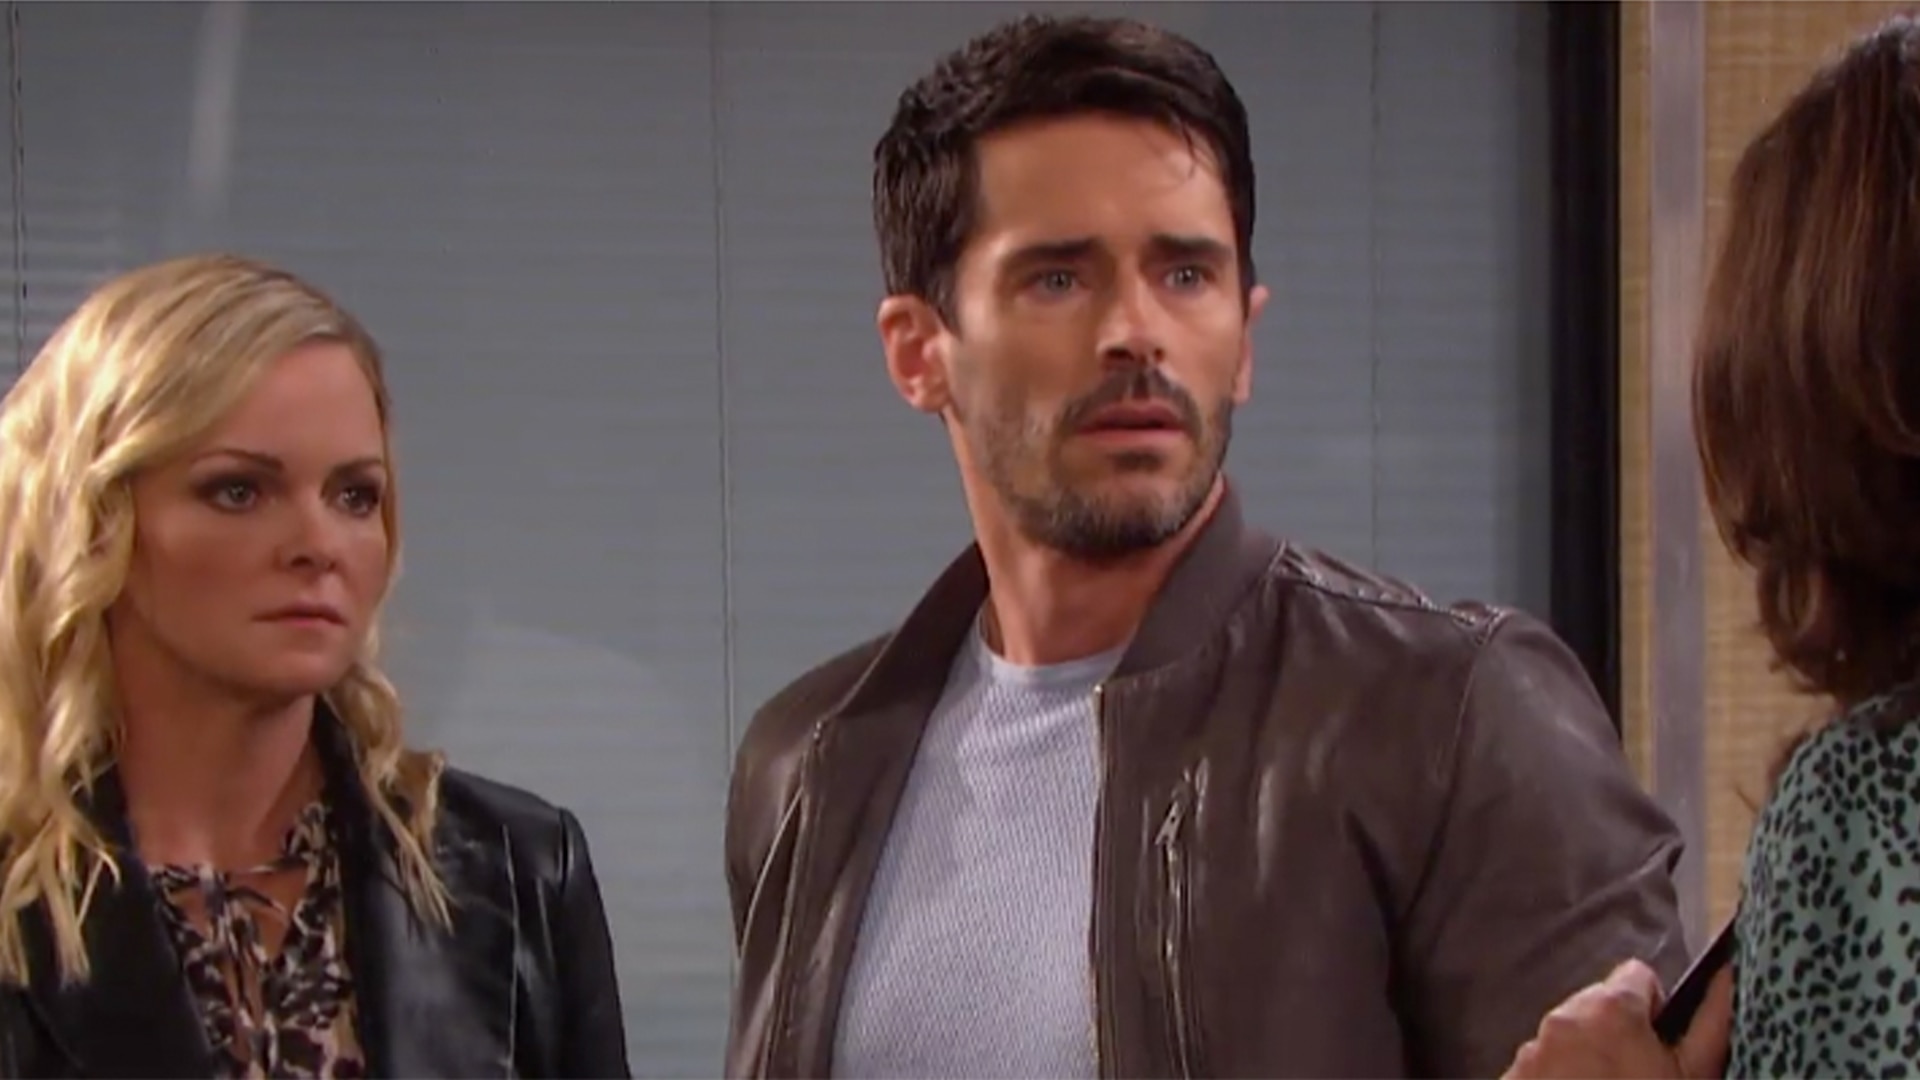 Watch Days of our Lives Current Preview Weekly Preview (8/31/20)